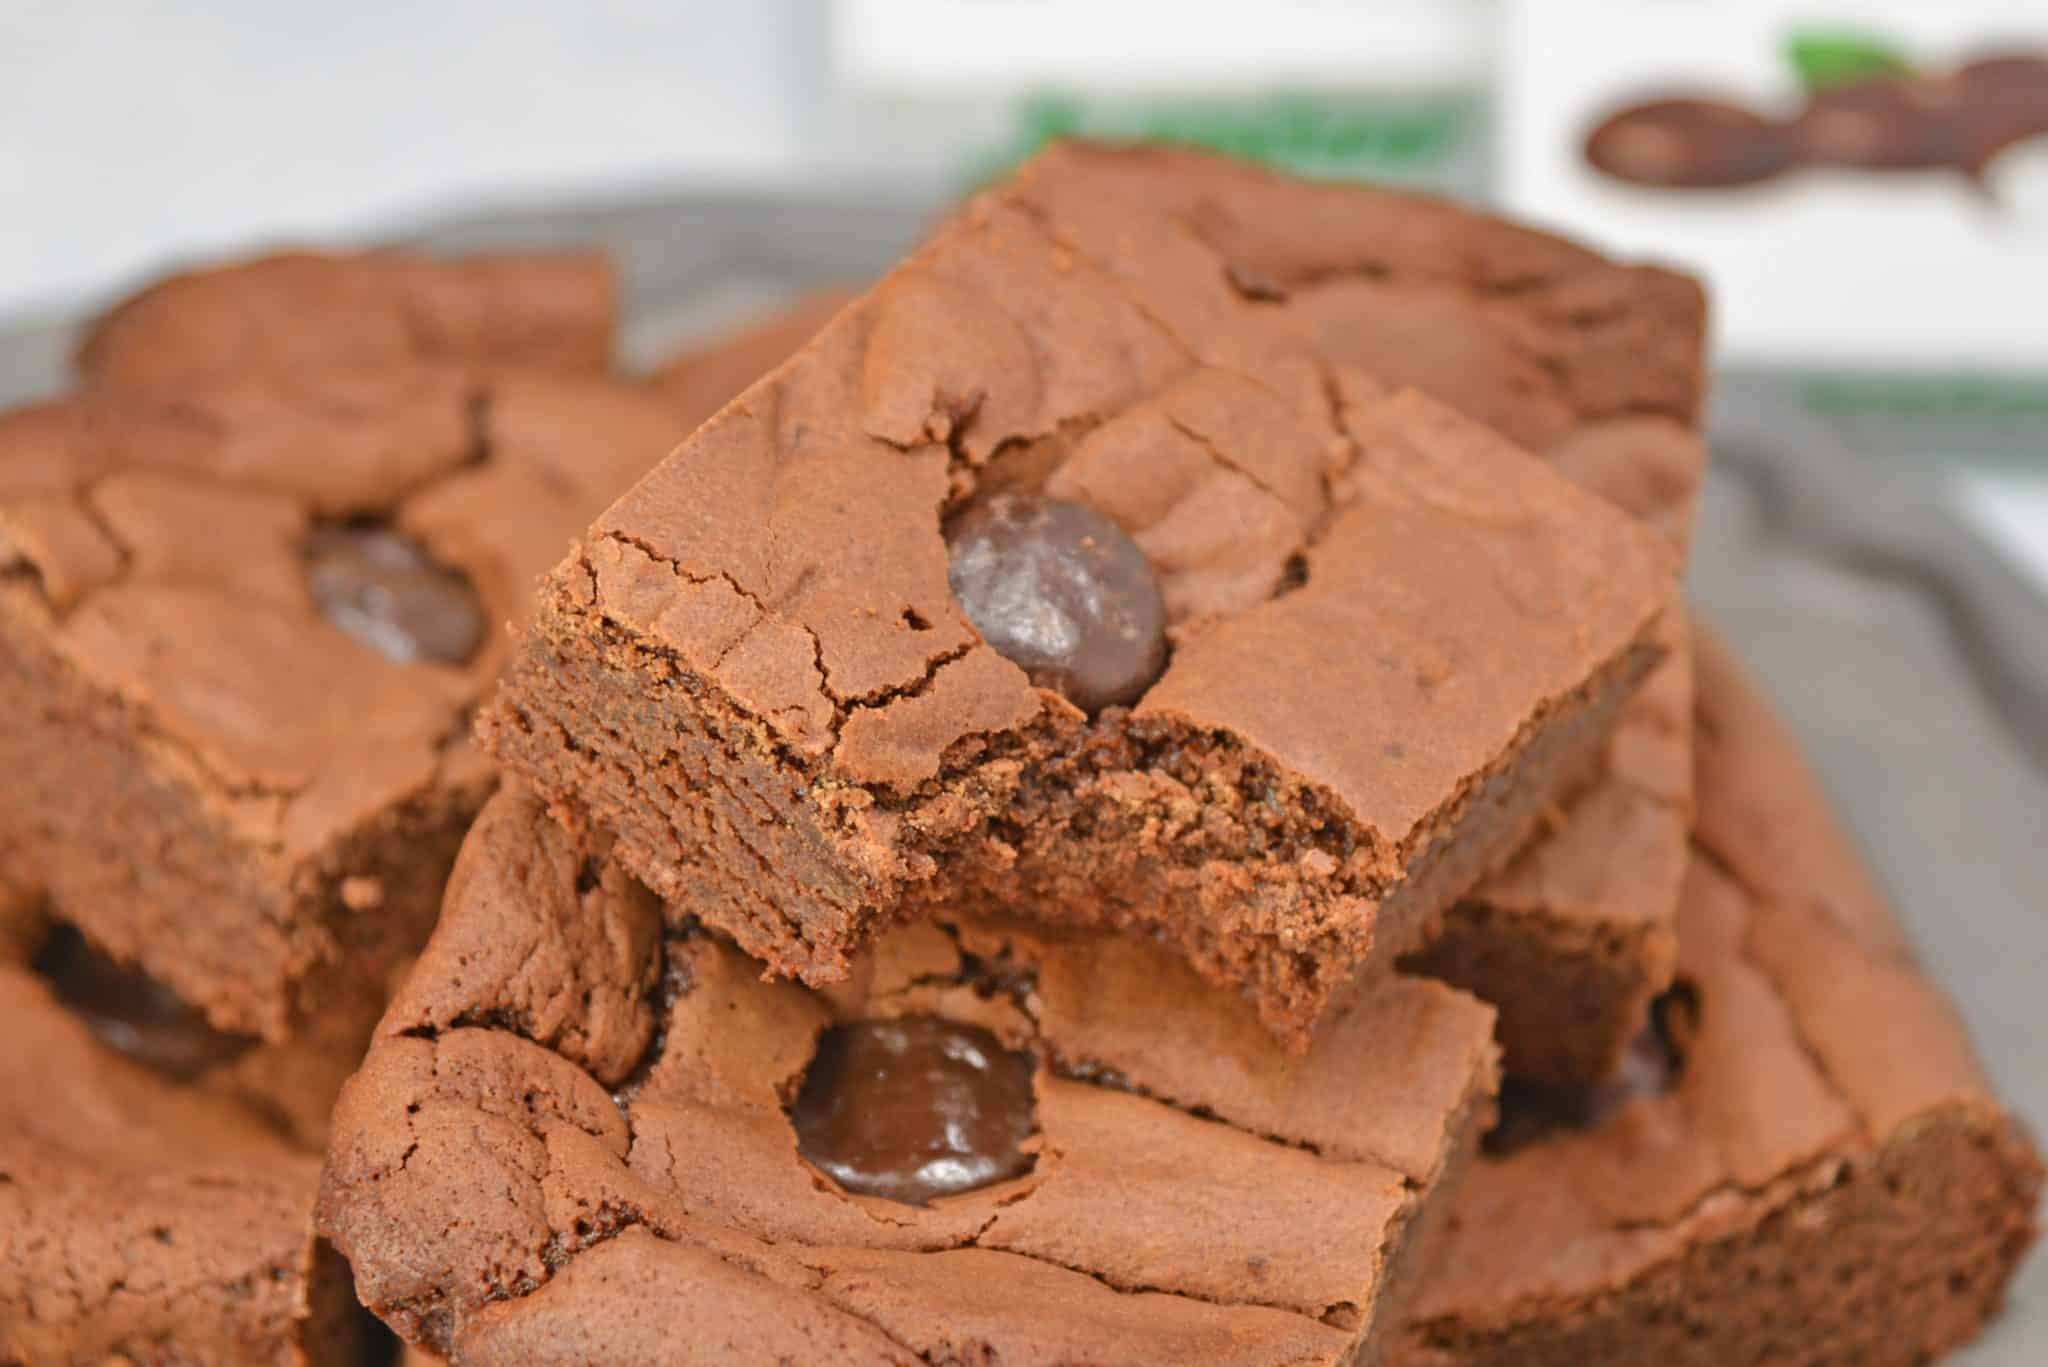 Junior Mint Brownies are homemade brownies blended with cool, creamy Junior Mints. This delicious chewy brownie recipe will satisfy any brownie cravings! #homemadebrownies #juniormints #chewybrownierecipe www.savoryexperiments.com